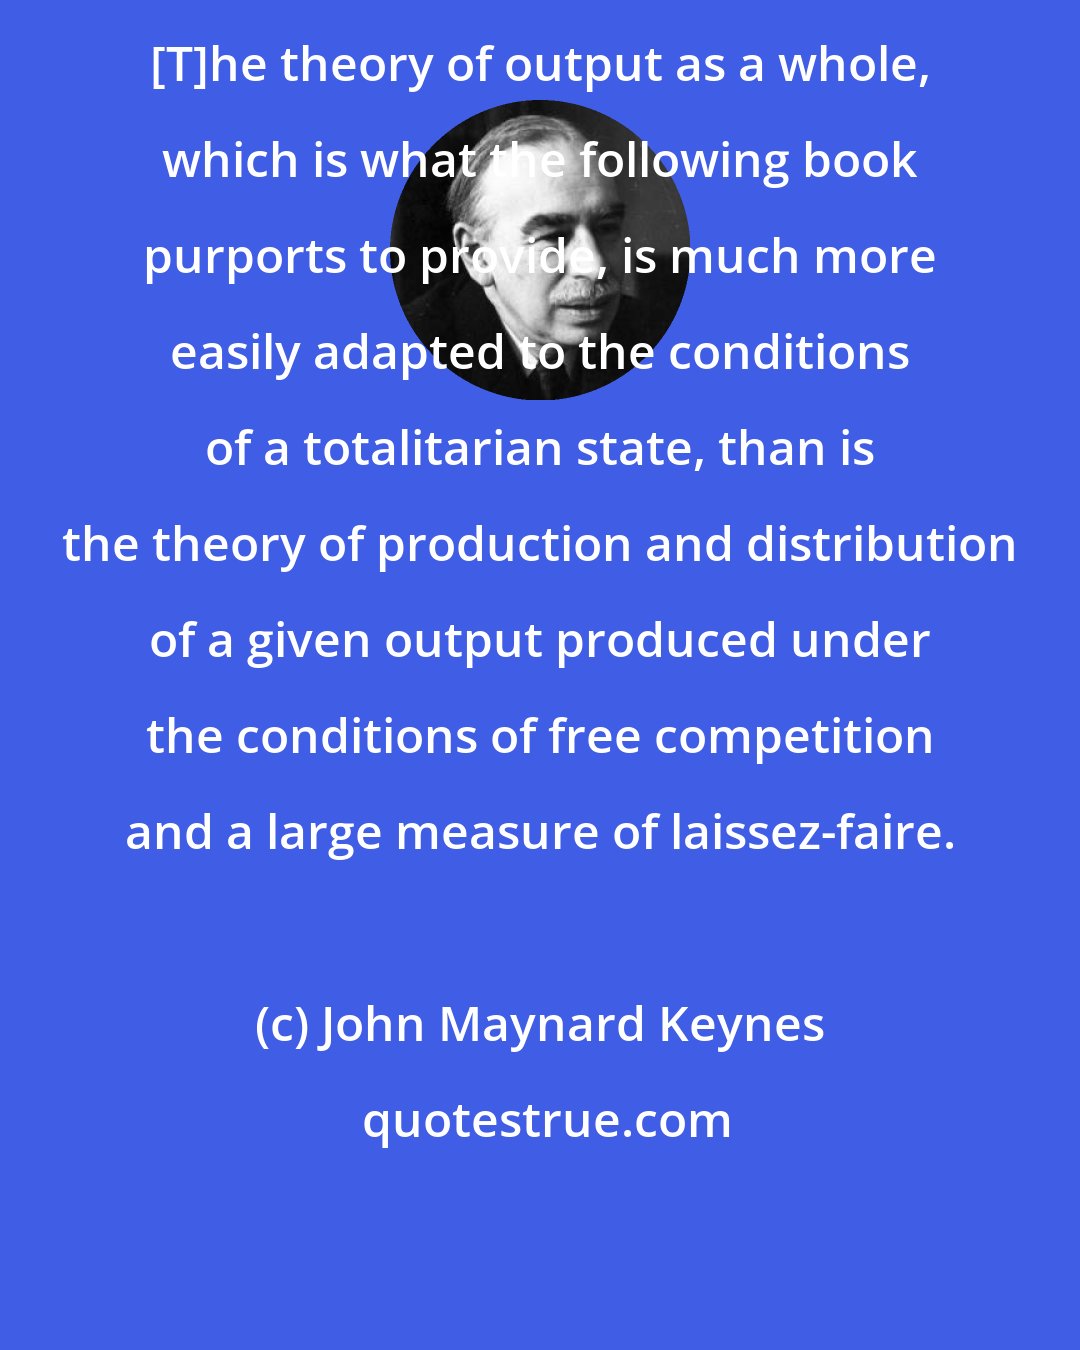 John Maynard Keynes: [T]he theory of output as a whole, which is what the following book purports to provide, is much more easily adapted to the conditions of a totalitarian state, than is the theory of production and distribution of a given output produced under the conditions of free competition and a large measure of laissez-faire.